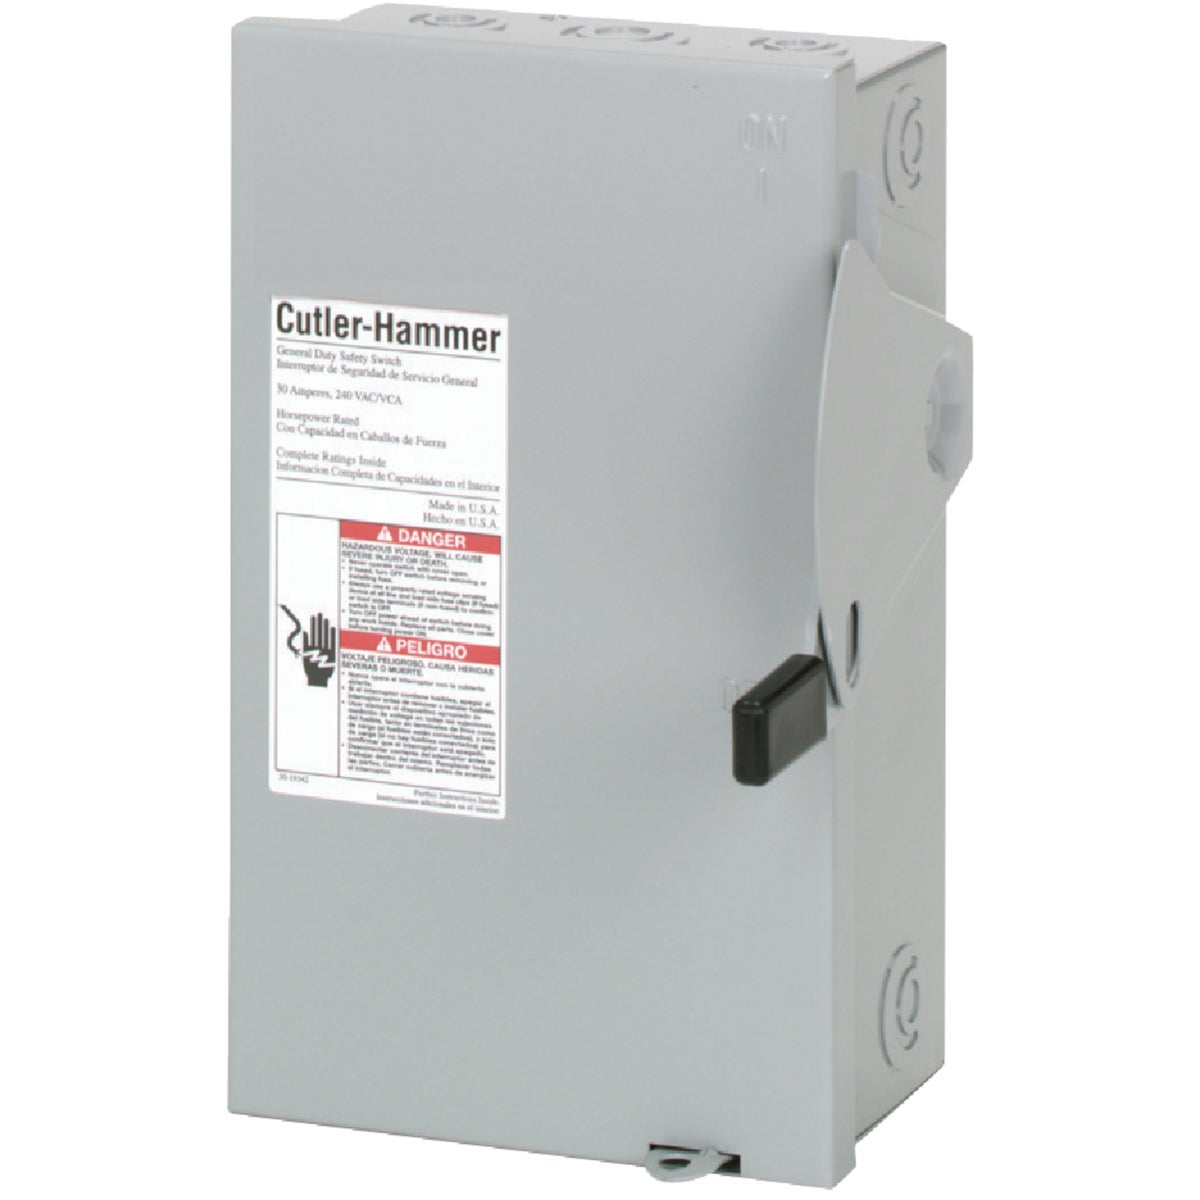 Item 522768, Fusible general-duty safety switch designed for residential and commercial 